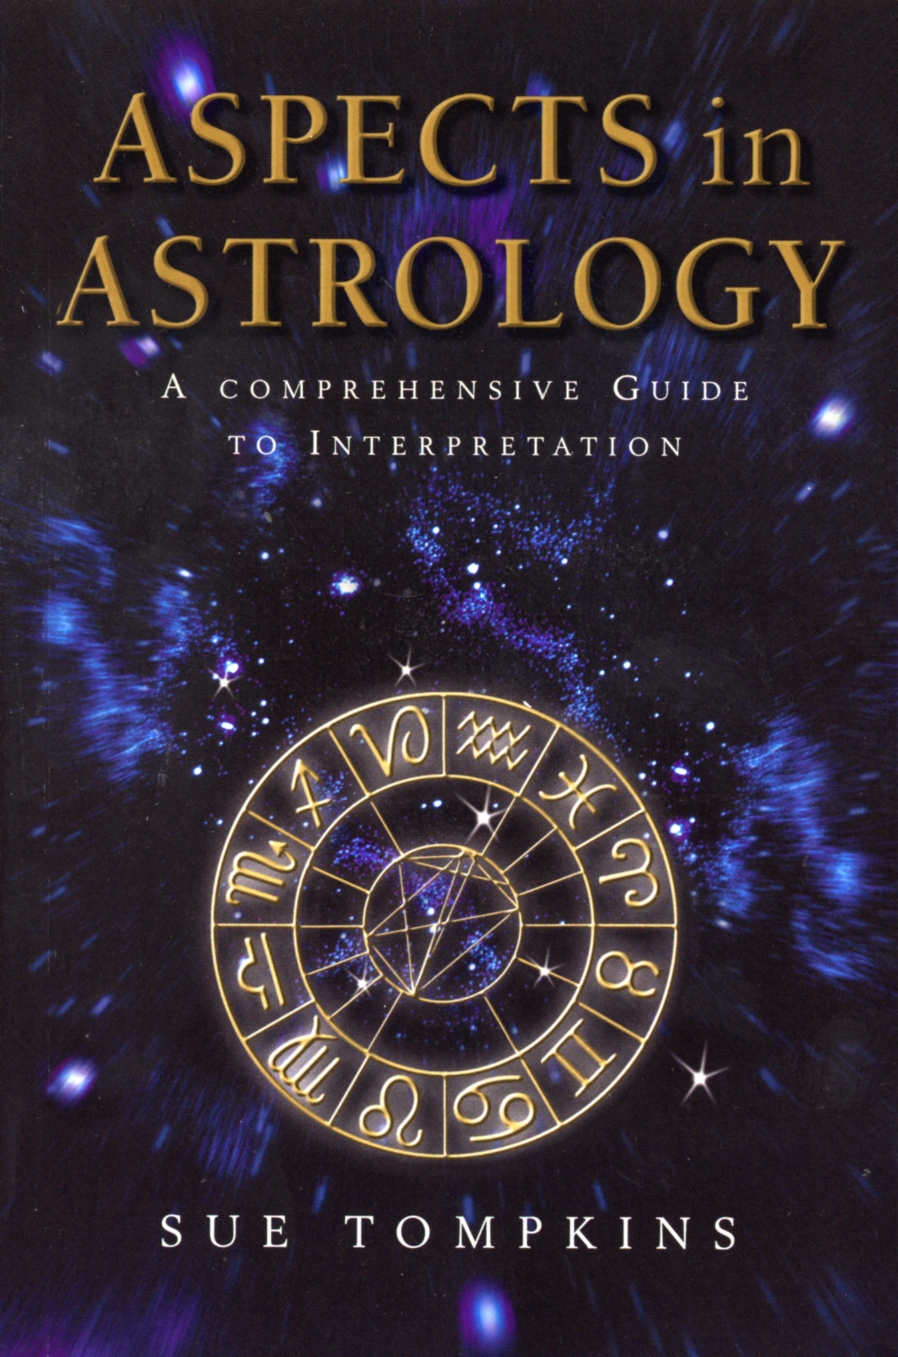 read online all astrology books